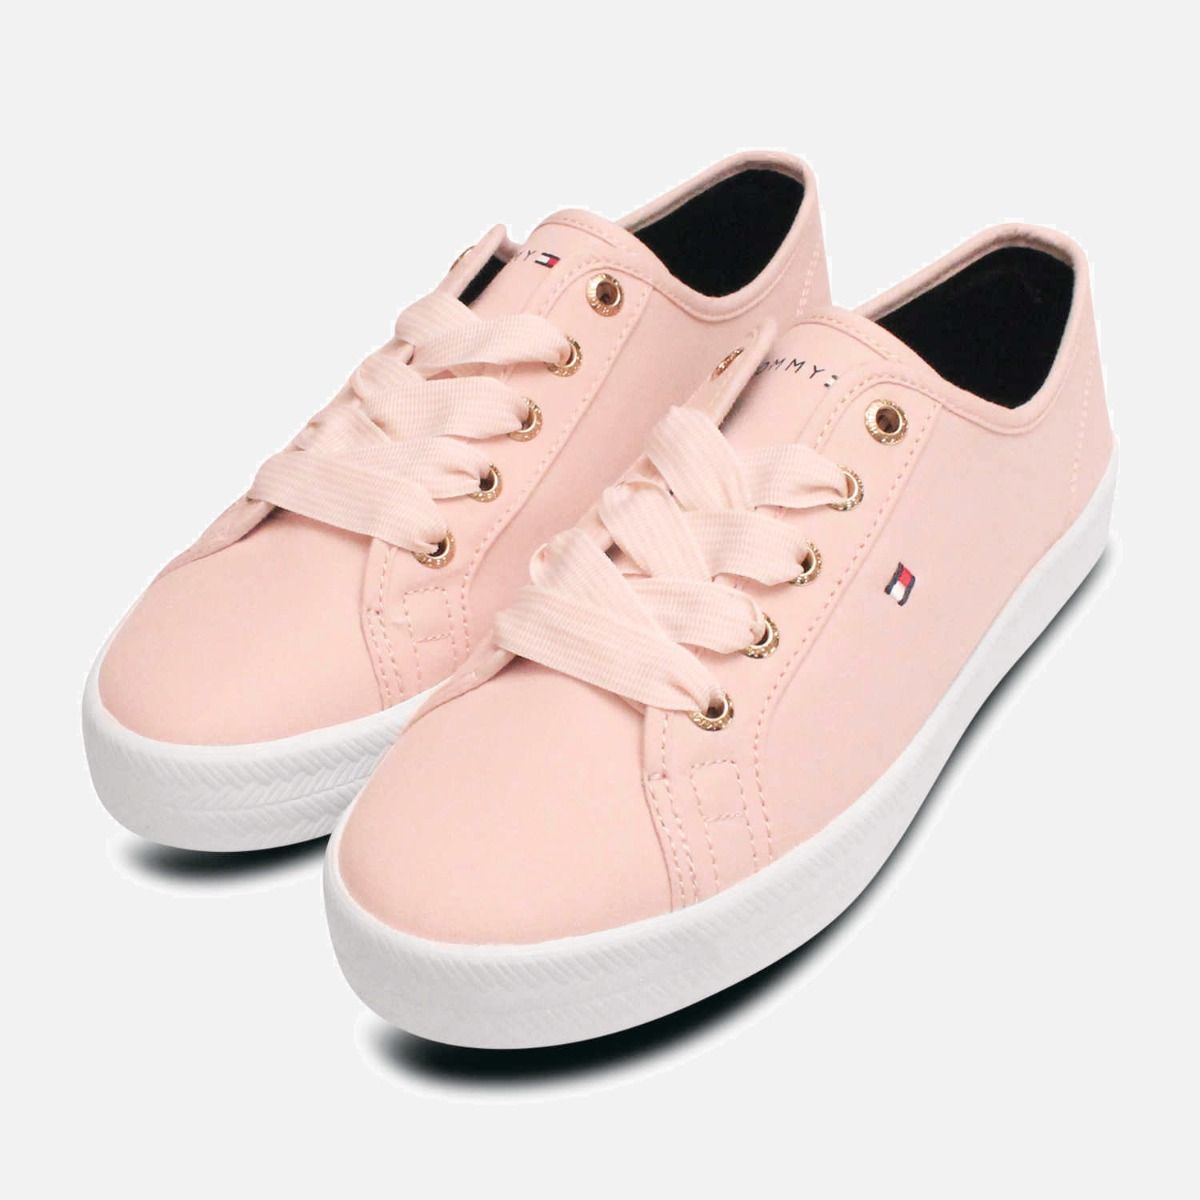 Tommy Hilfiger Pink Style Sneaker Shoes